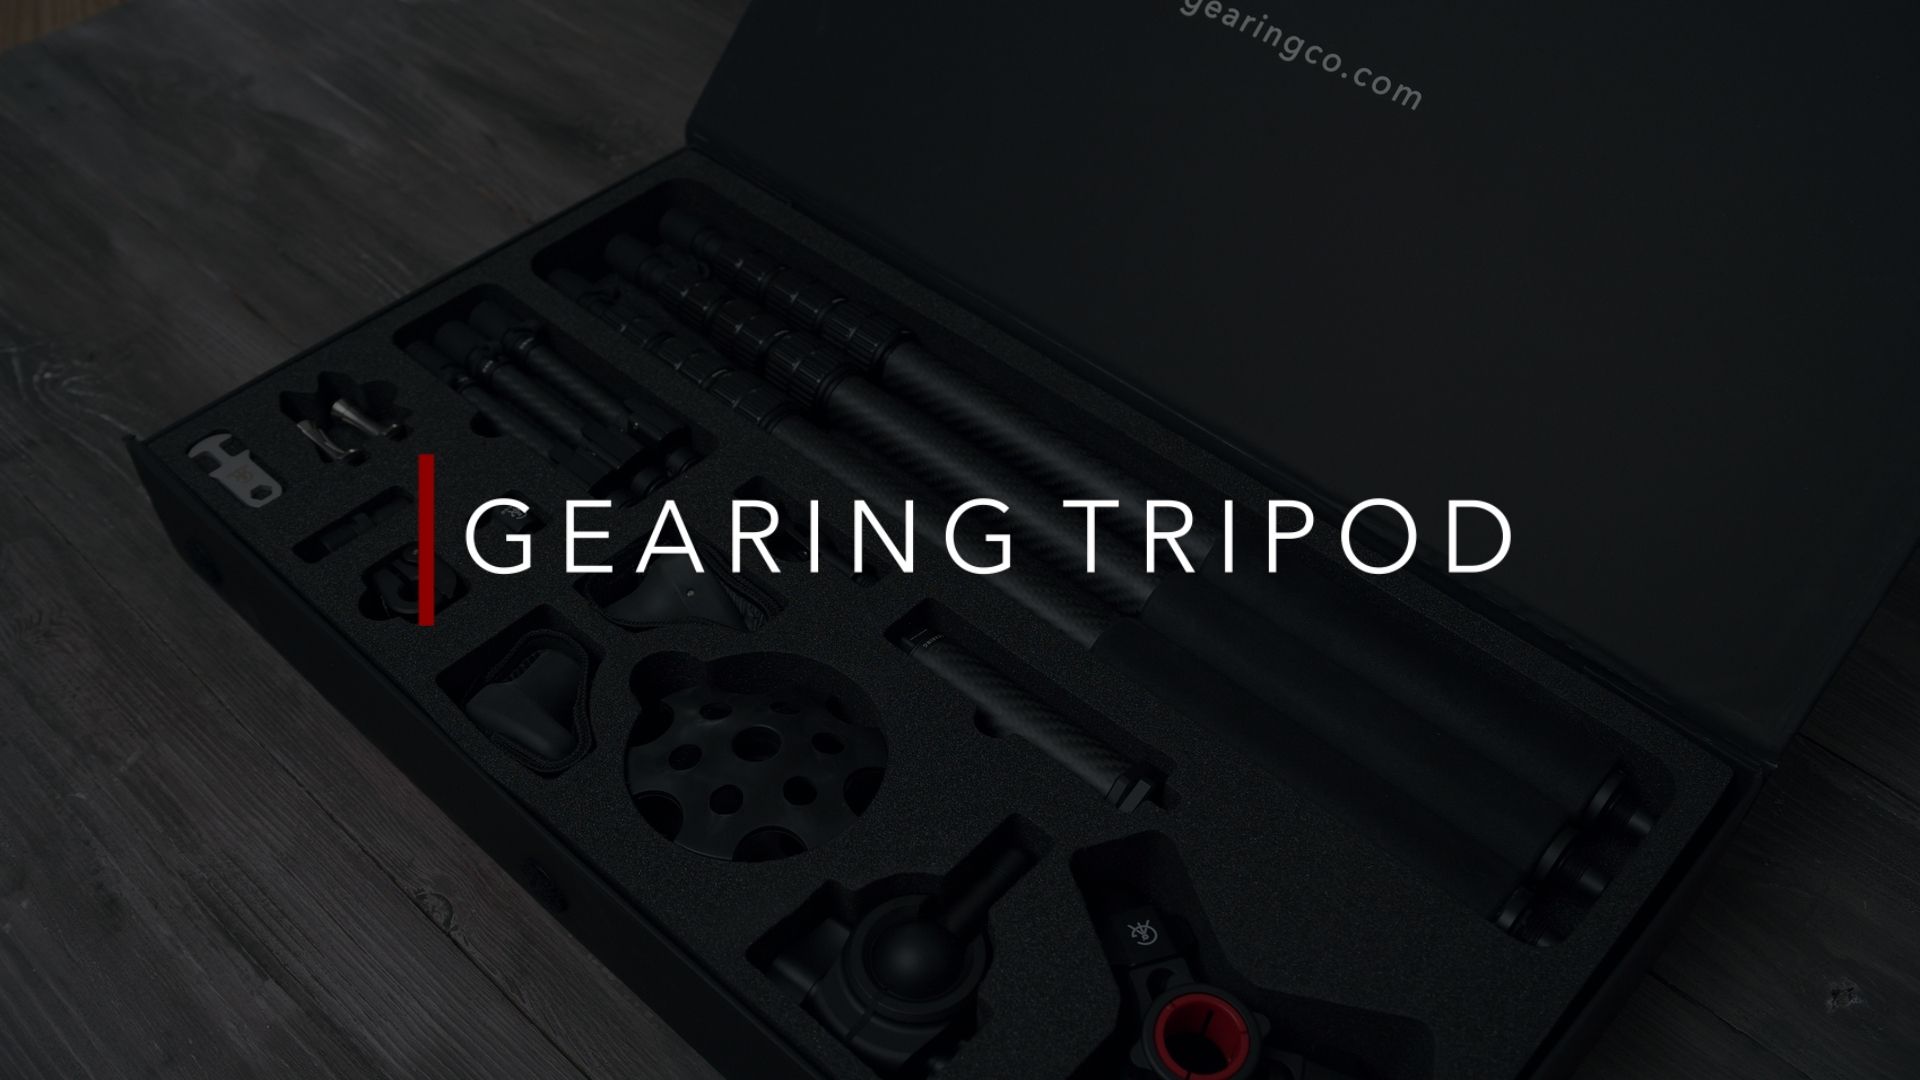 Gearing Tripod System - Overview